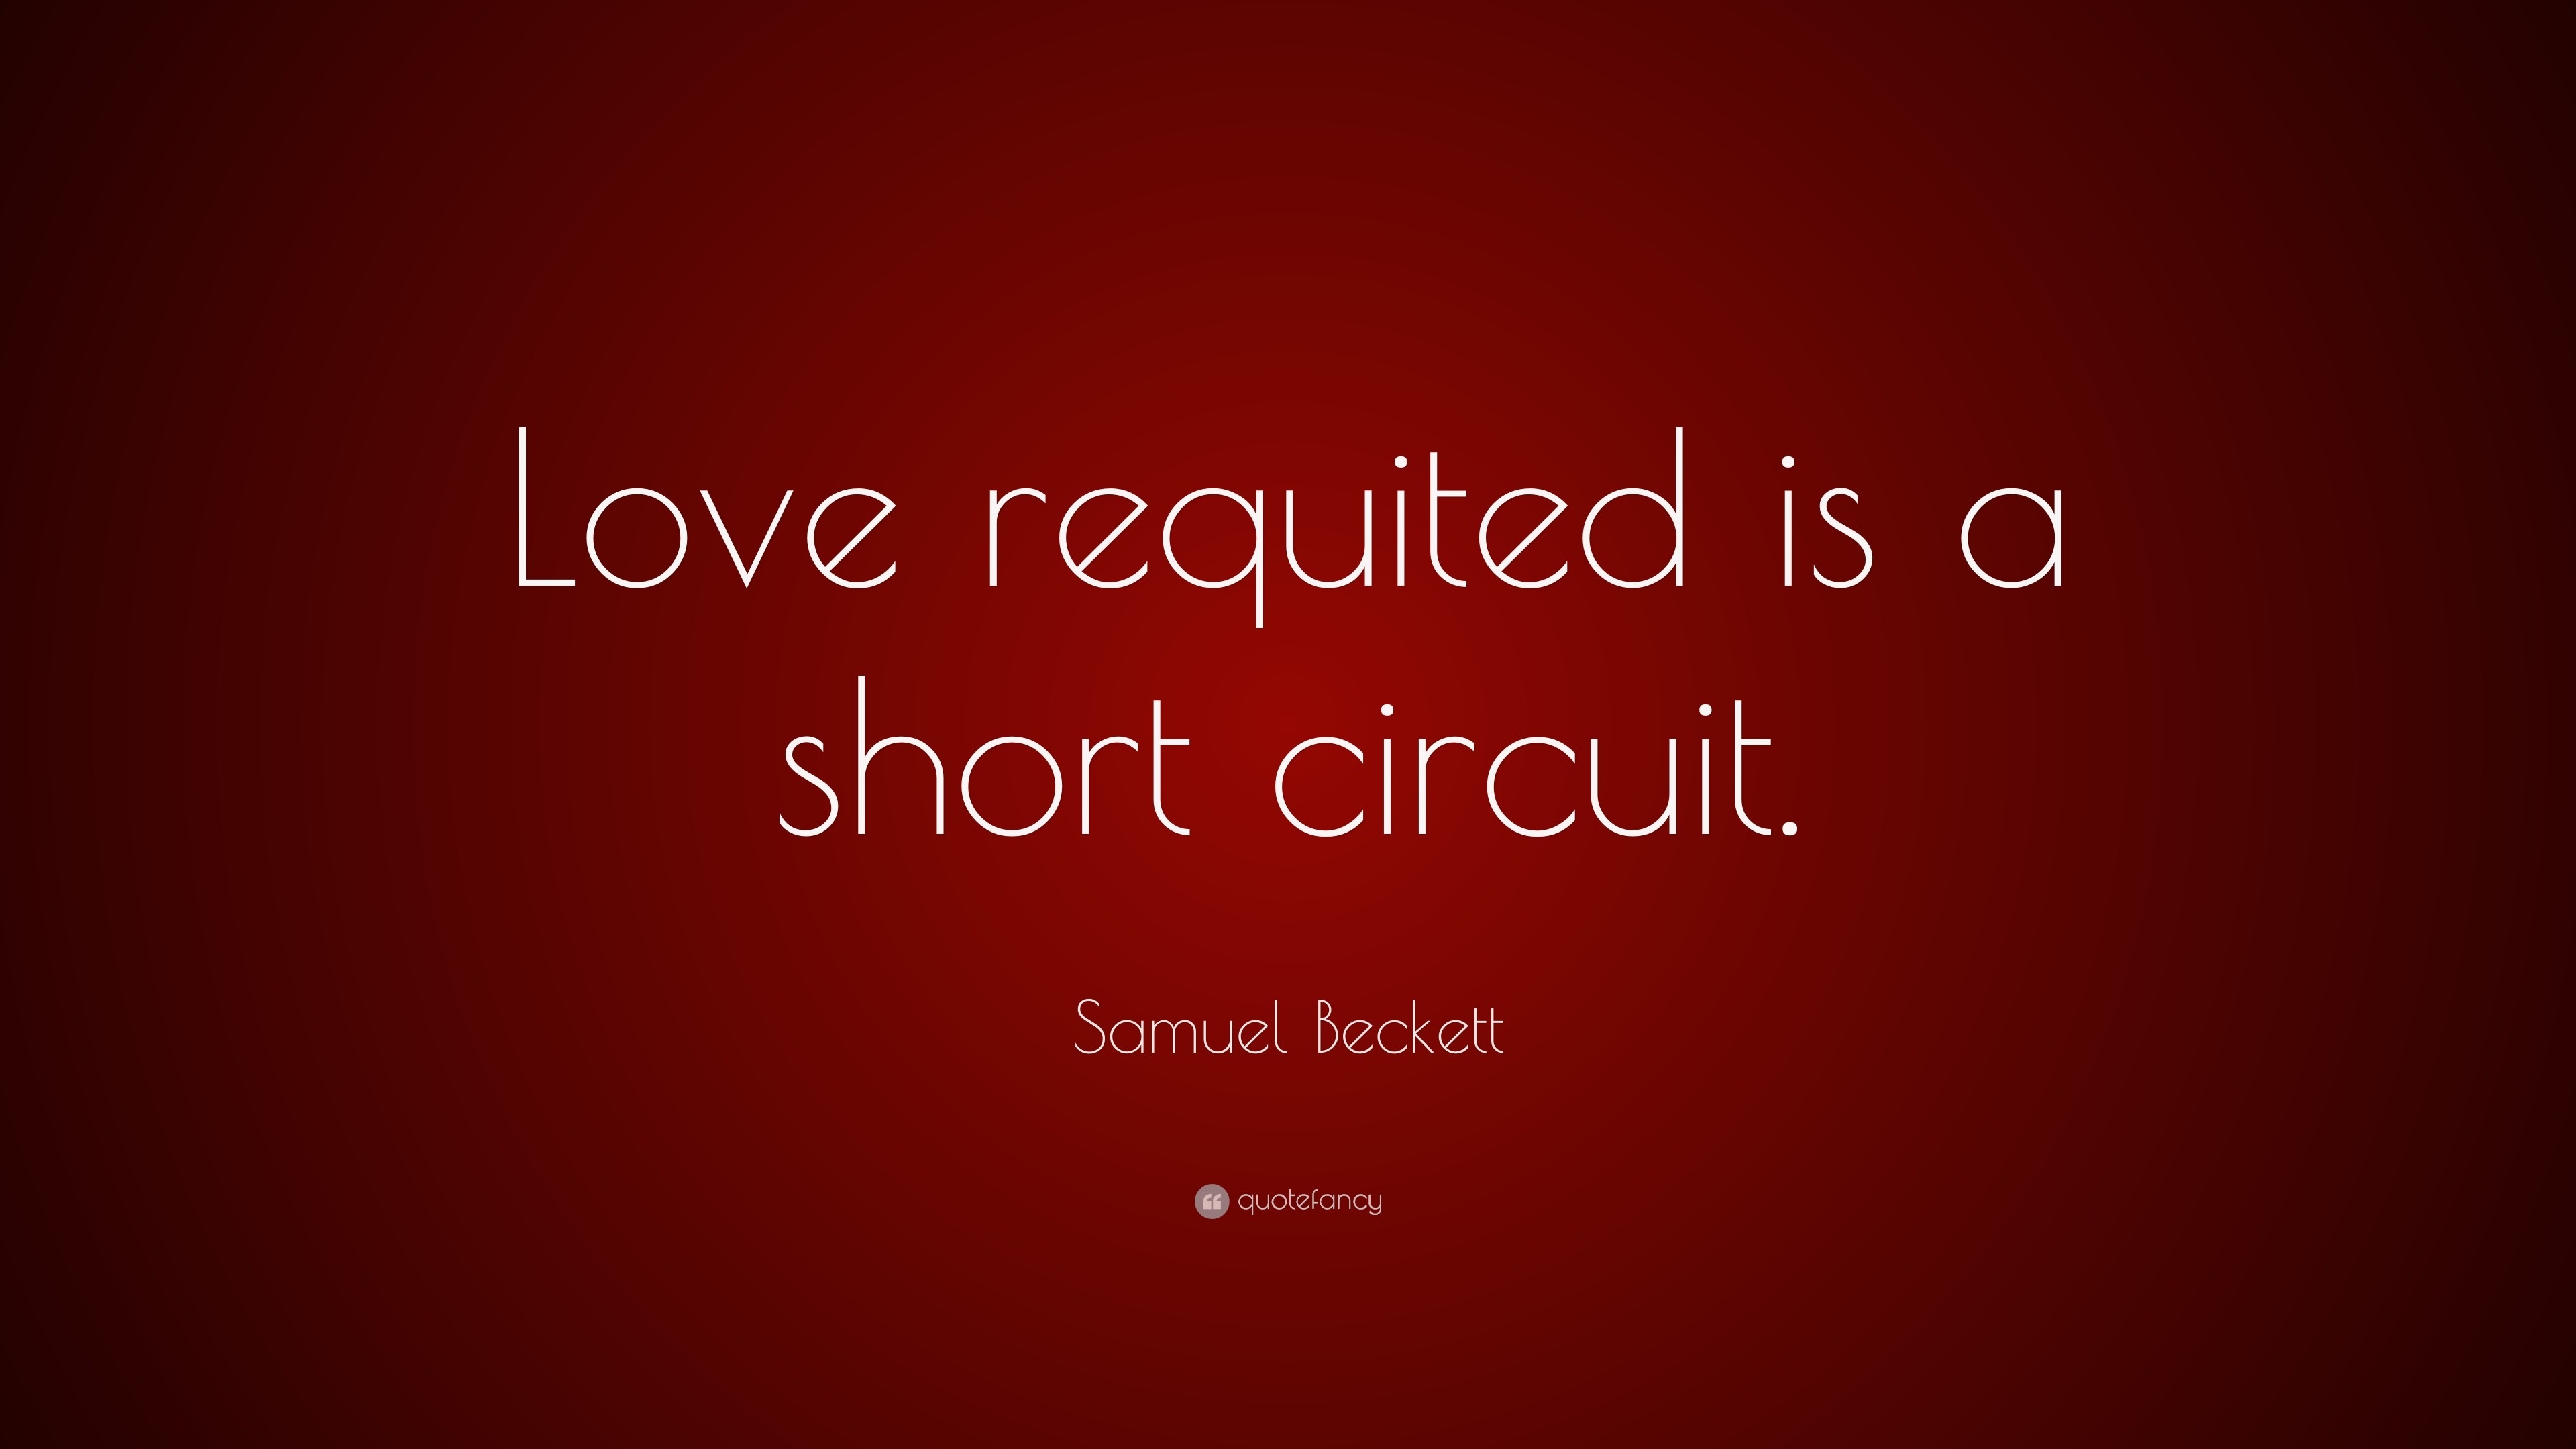 Samuel Beckett Quote “Love requited is a short circuit ”